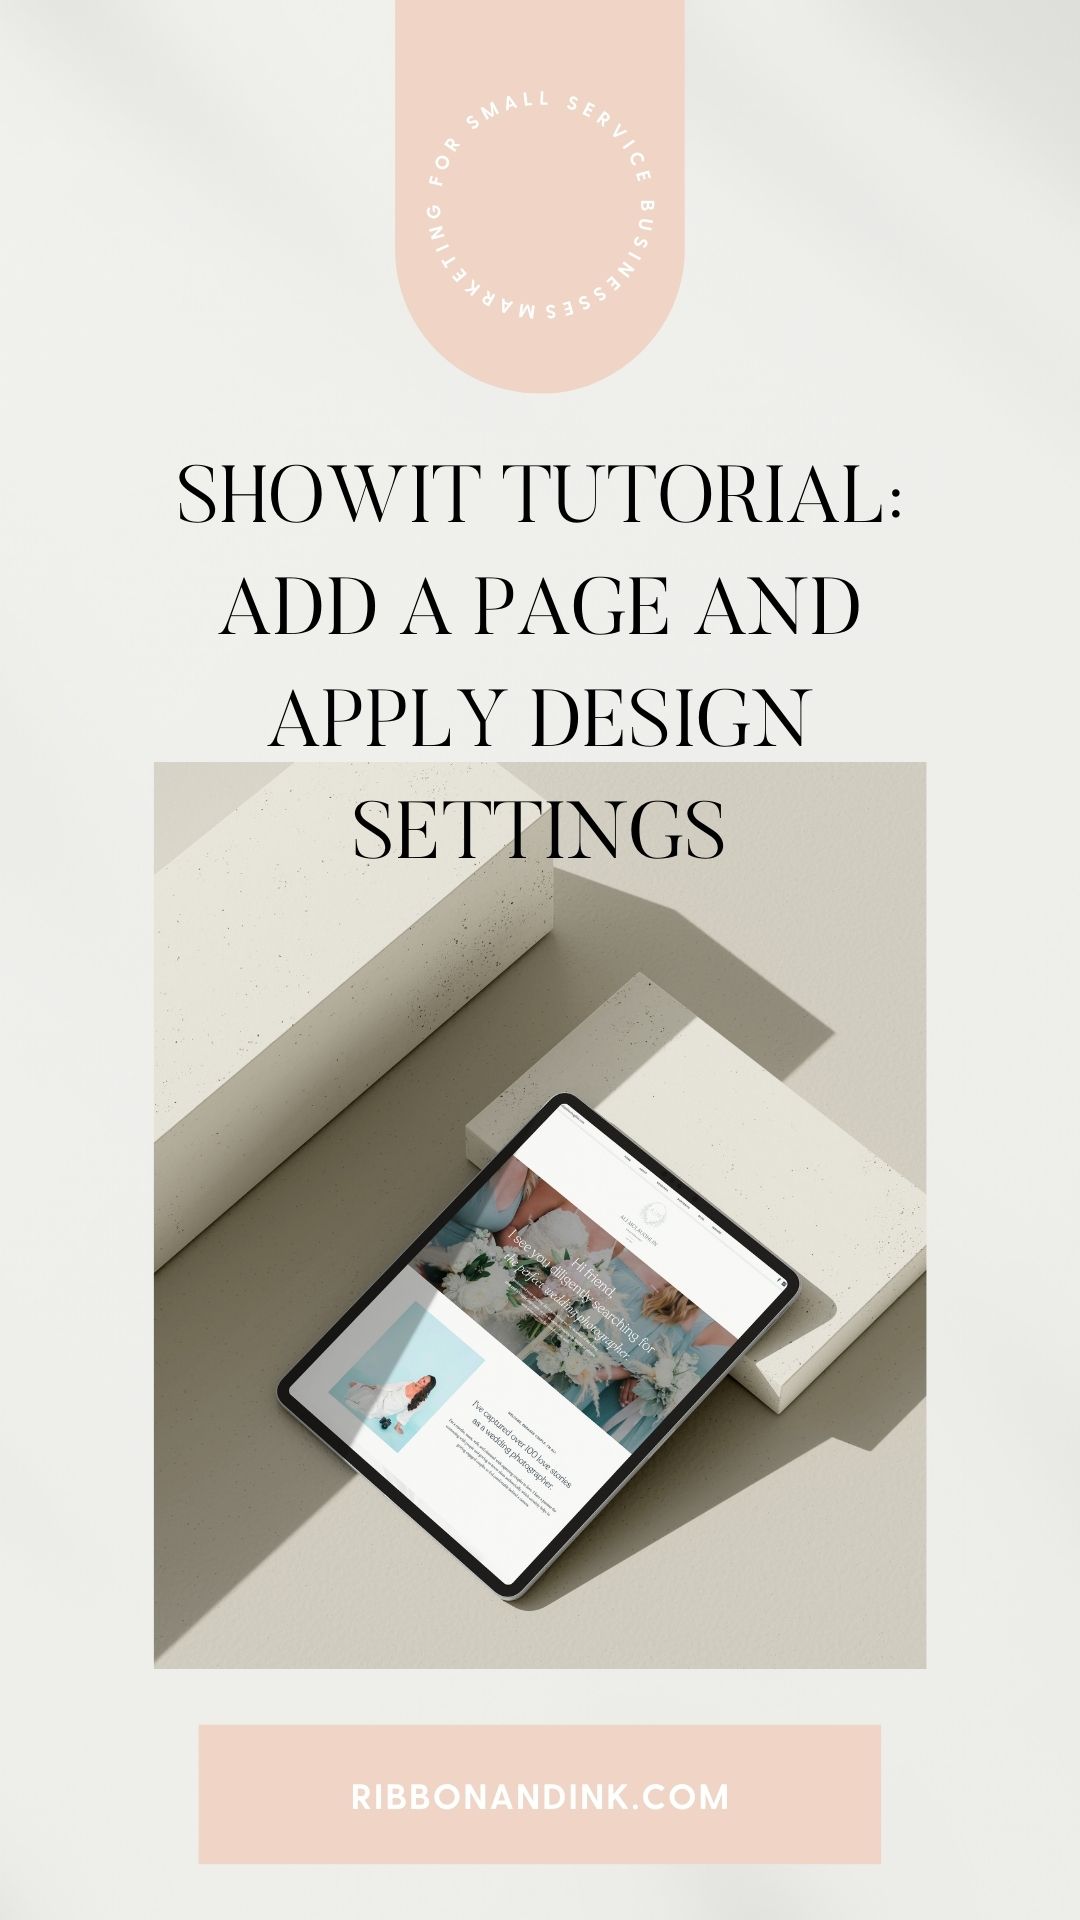 showit website tutorial / how to add a page and apply design settings